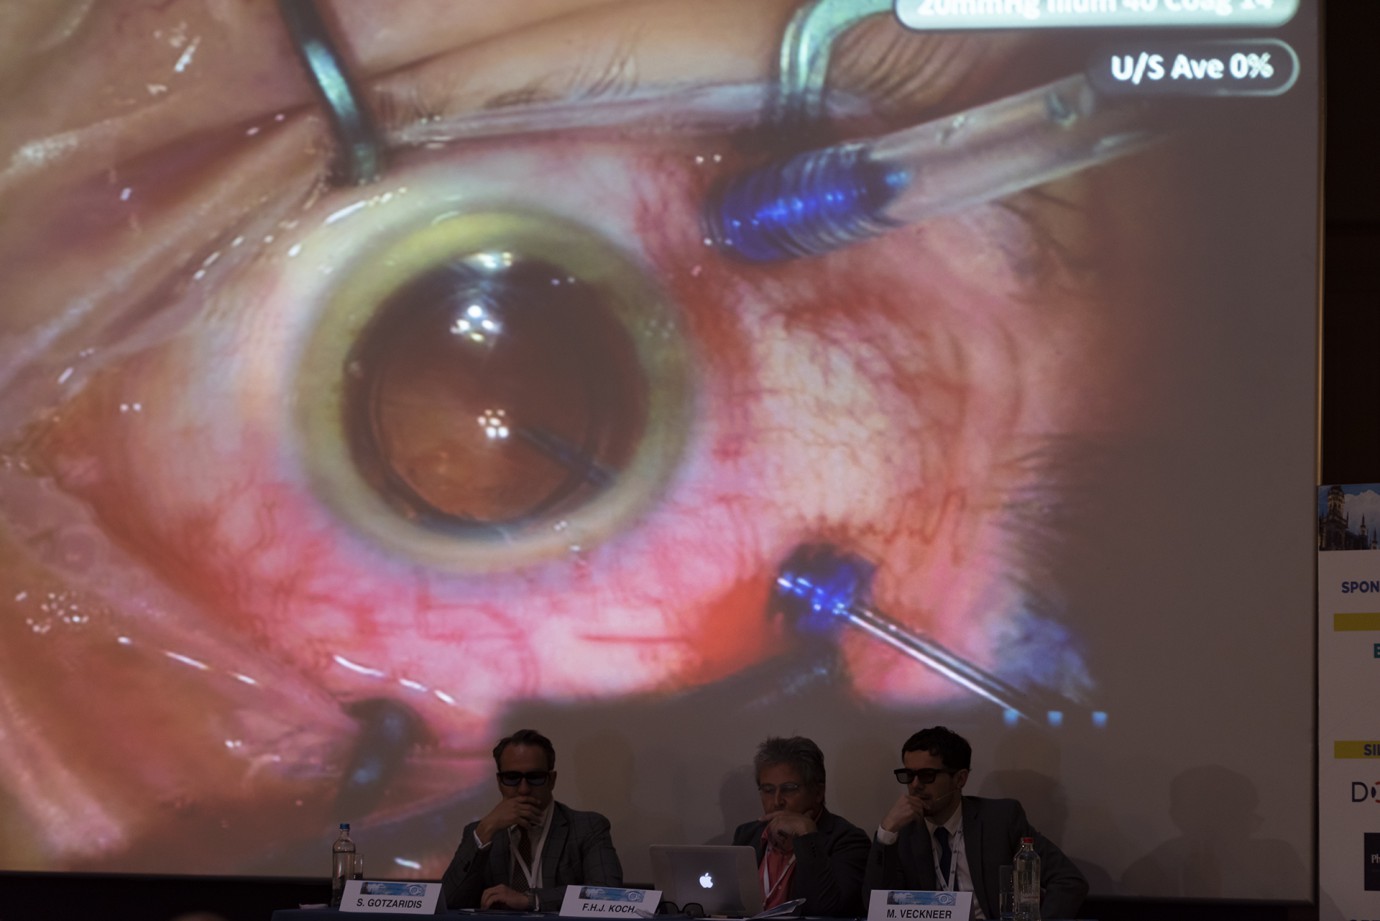 Brussels Retina Meeting 2019 / live surgery 3D projection